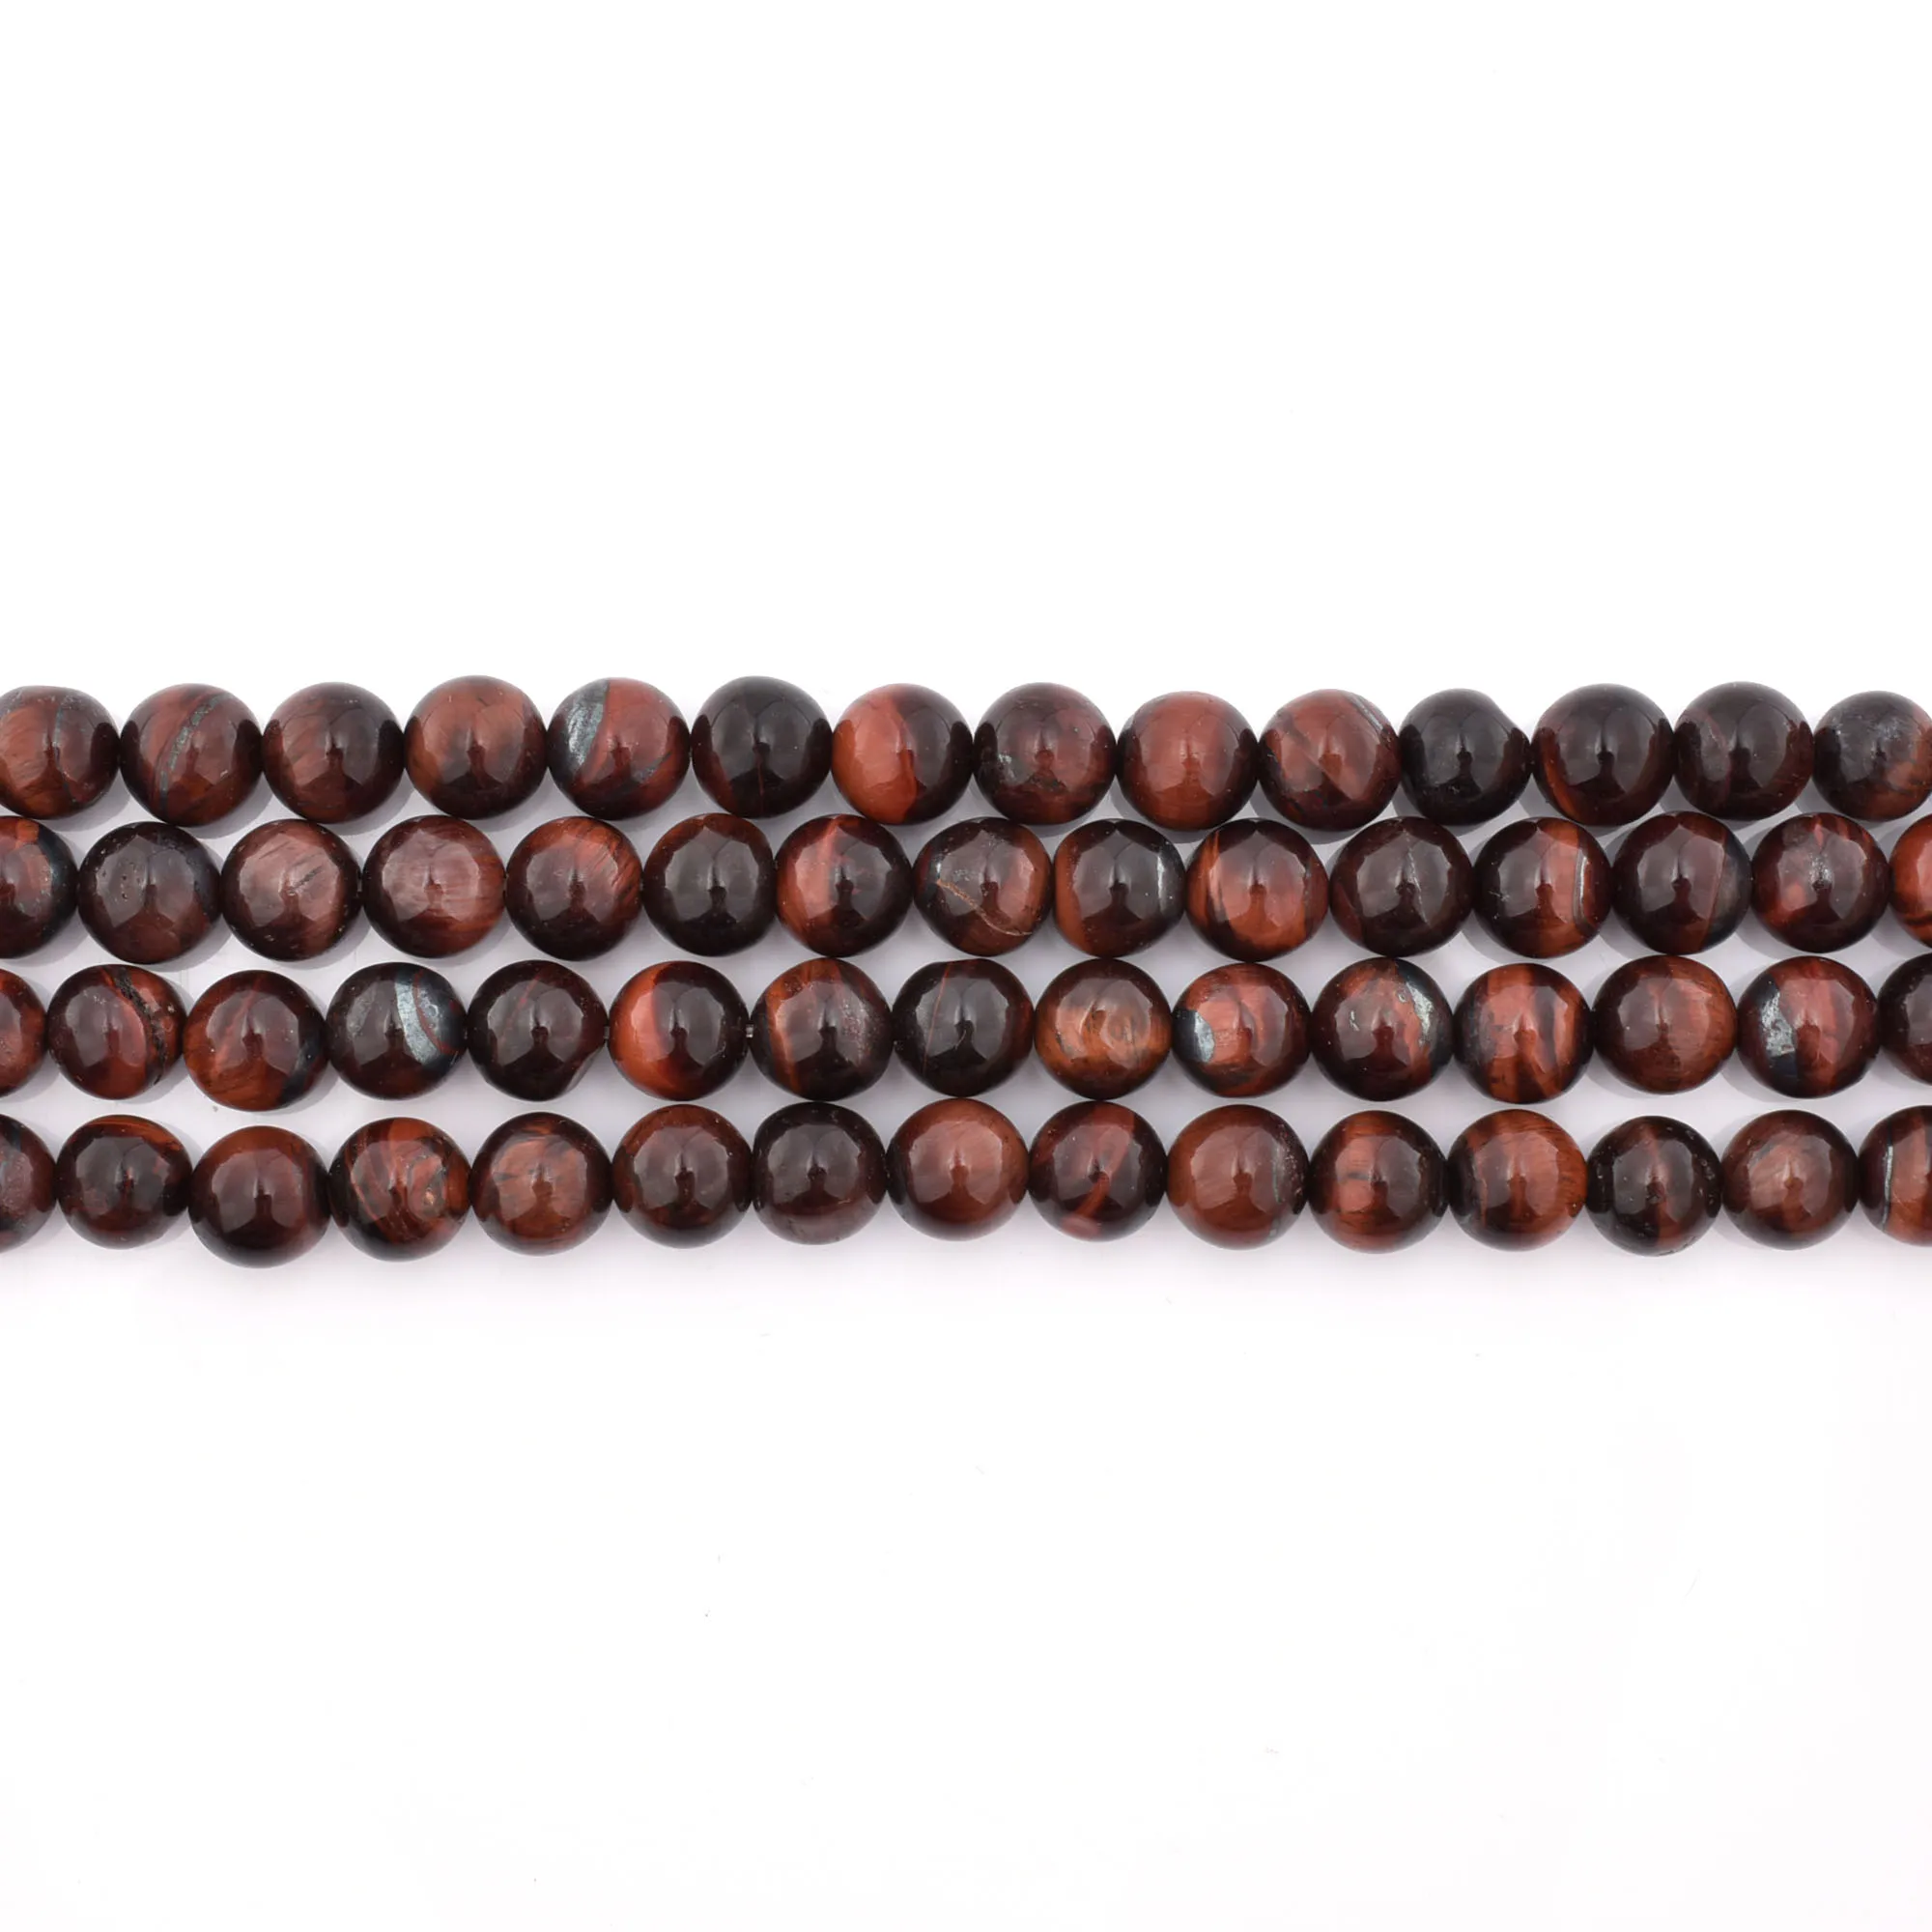 

Wholesale Bead 8Mm Making Natural Gemstone Macrame Tiger Eye Loose Stone, Please see the details bead color chart